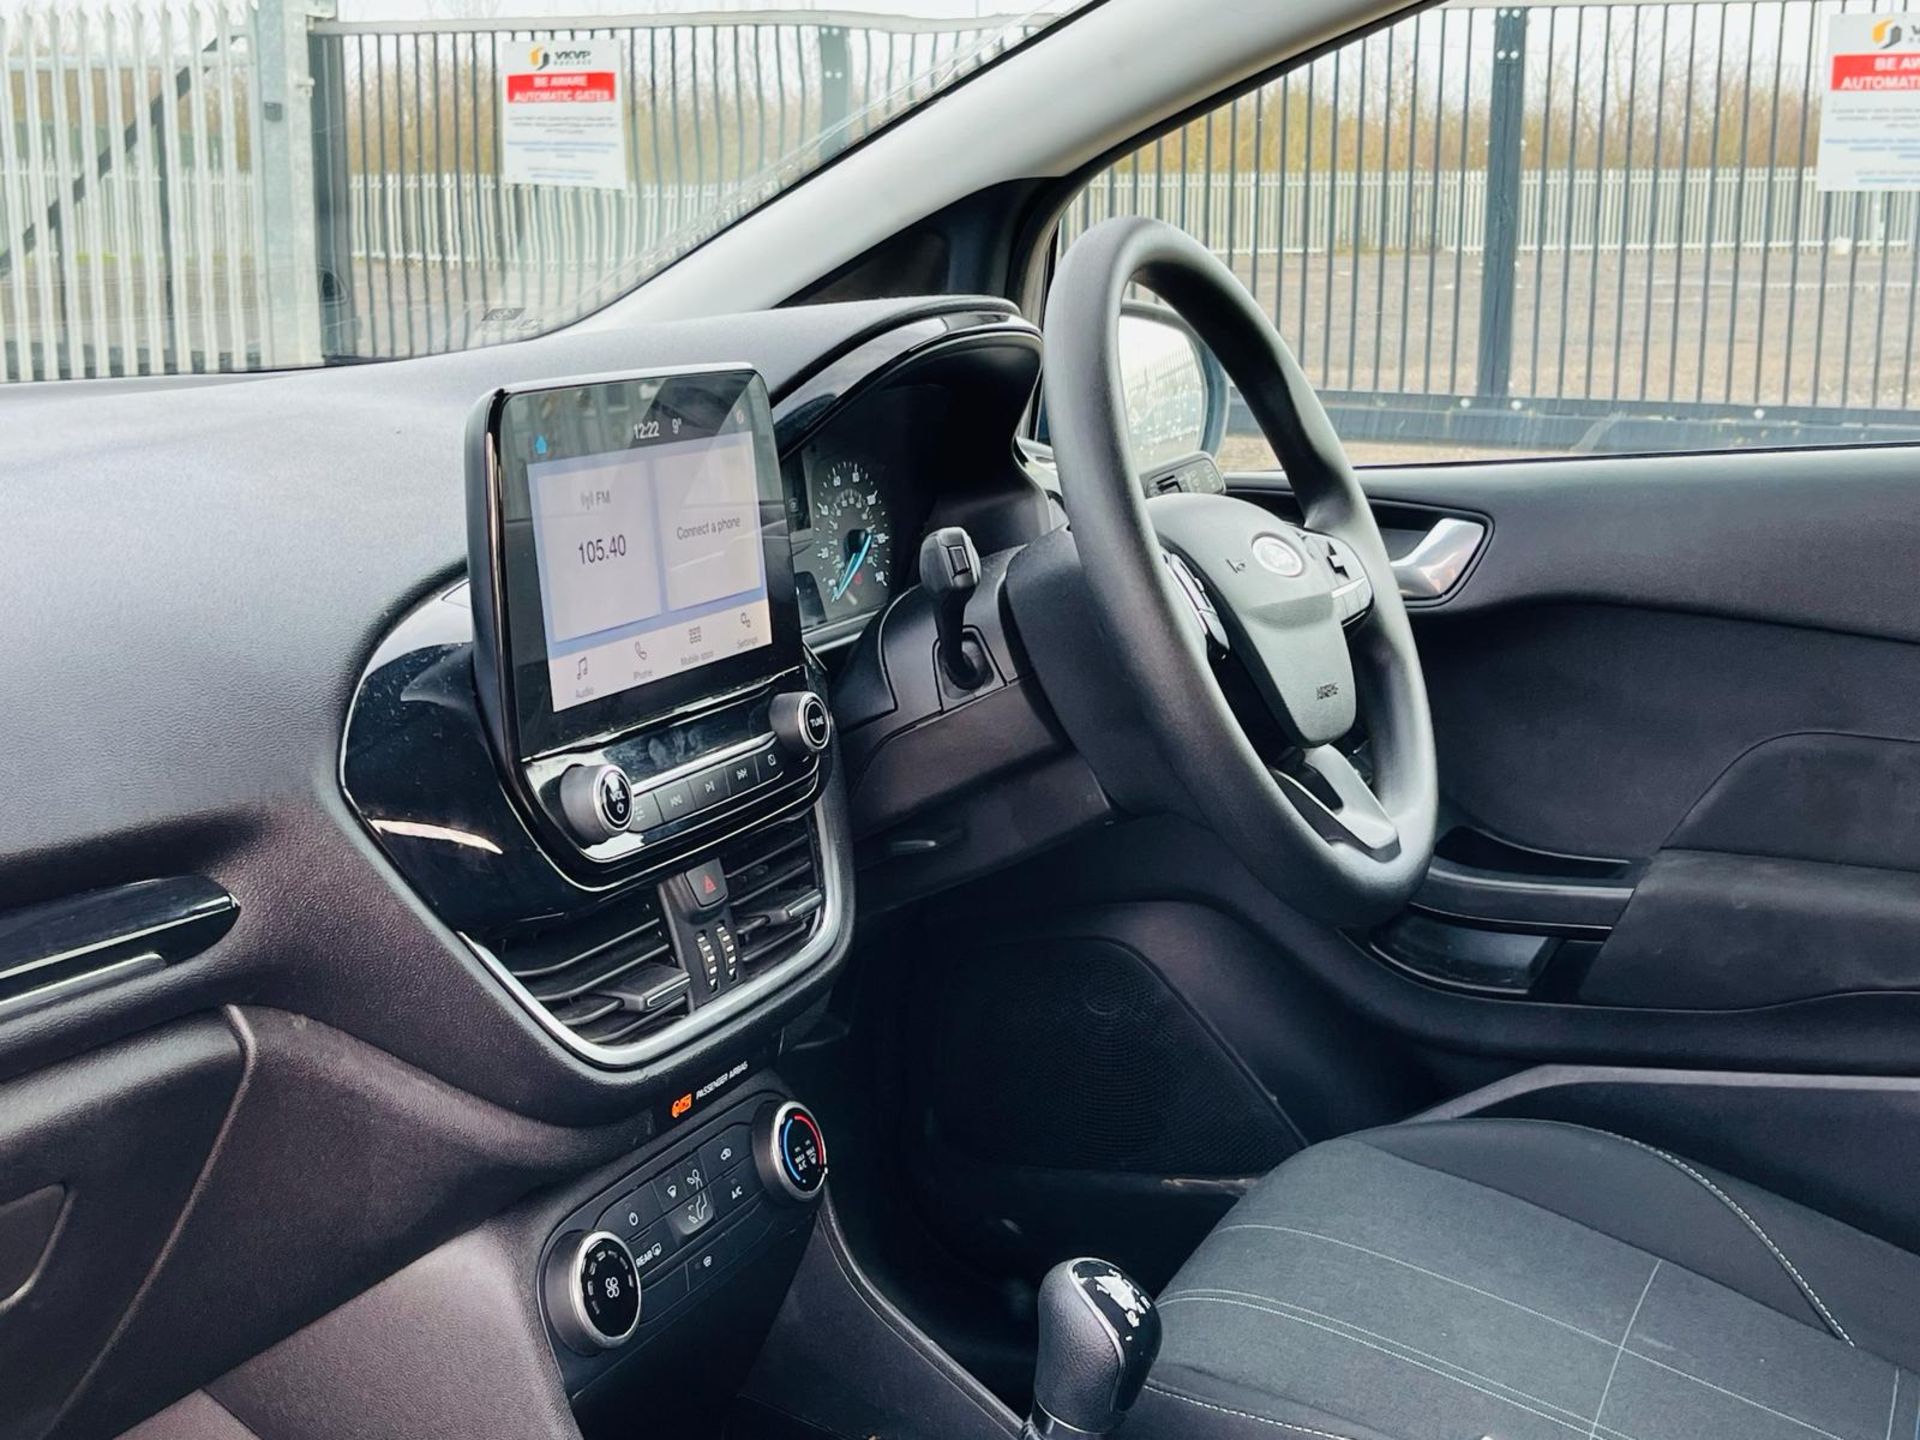 ** ON SALE ** Ford Fiesta Trend Ti-VCT 85 - 2019 '69 Reg' -No Vat-ULEZ Compliant - Only 48,539 miles - Image 19 of 32